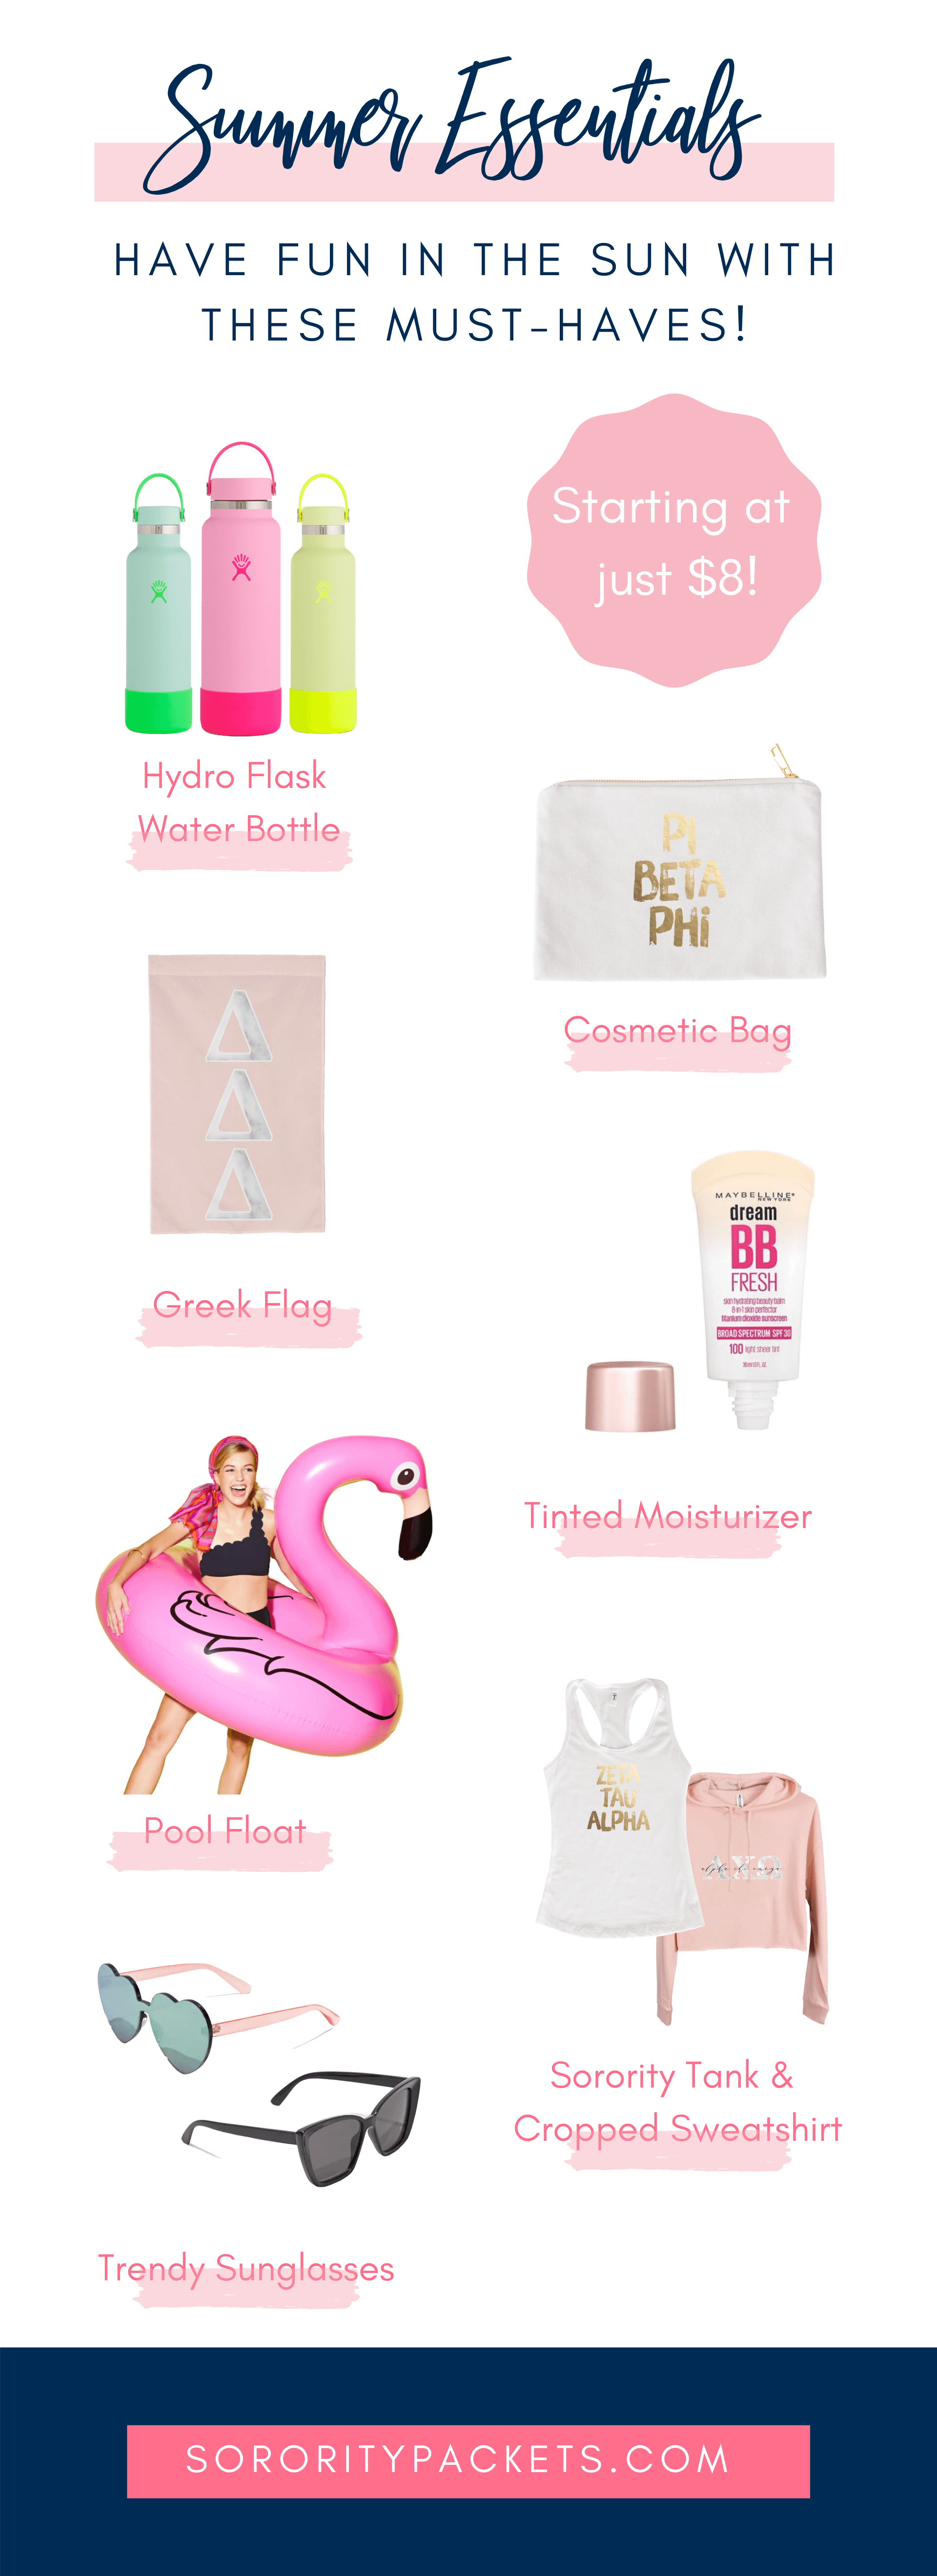 Sorority Essentials, items to have over the summer